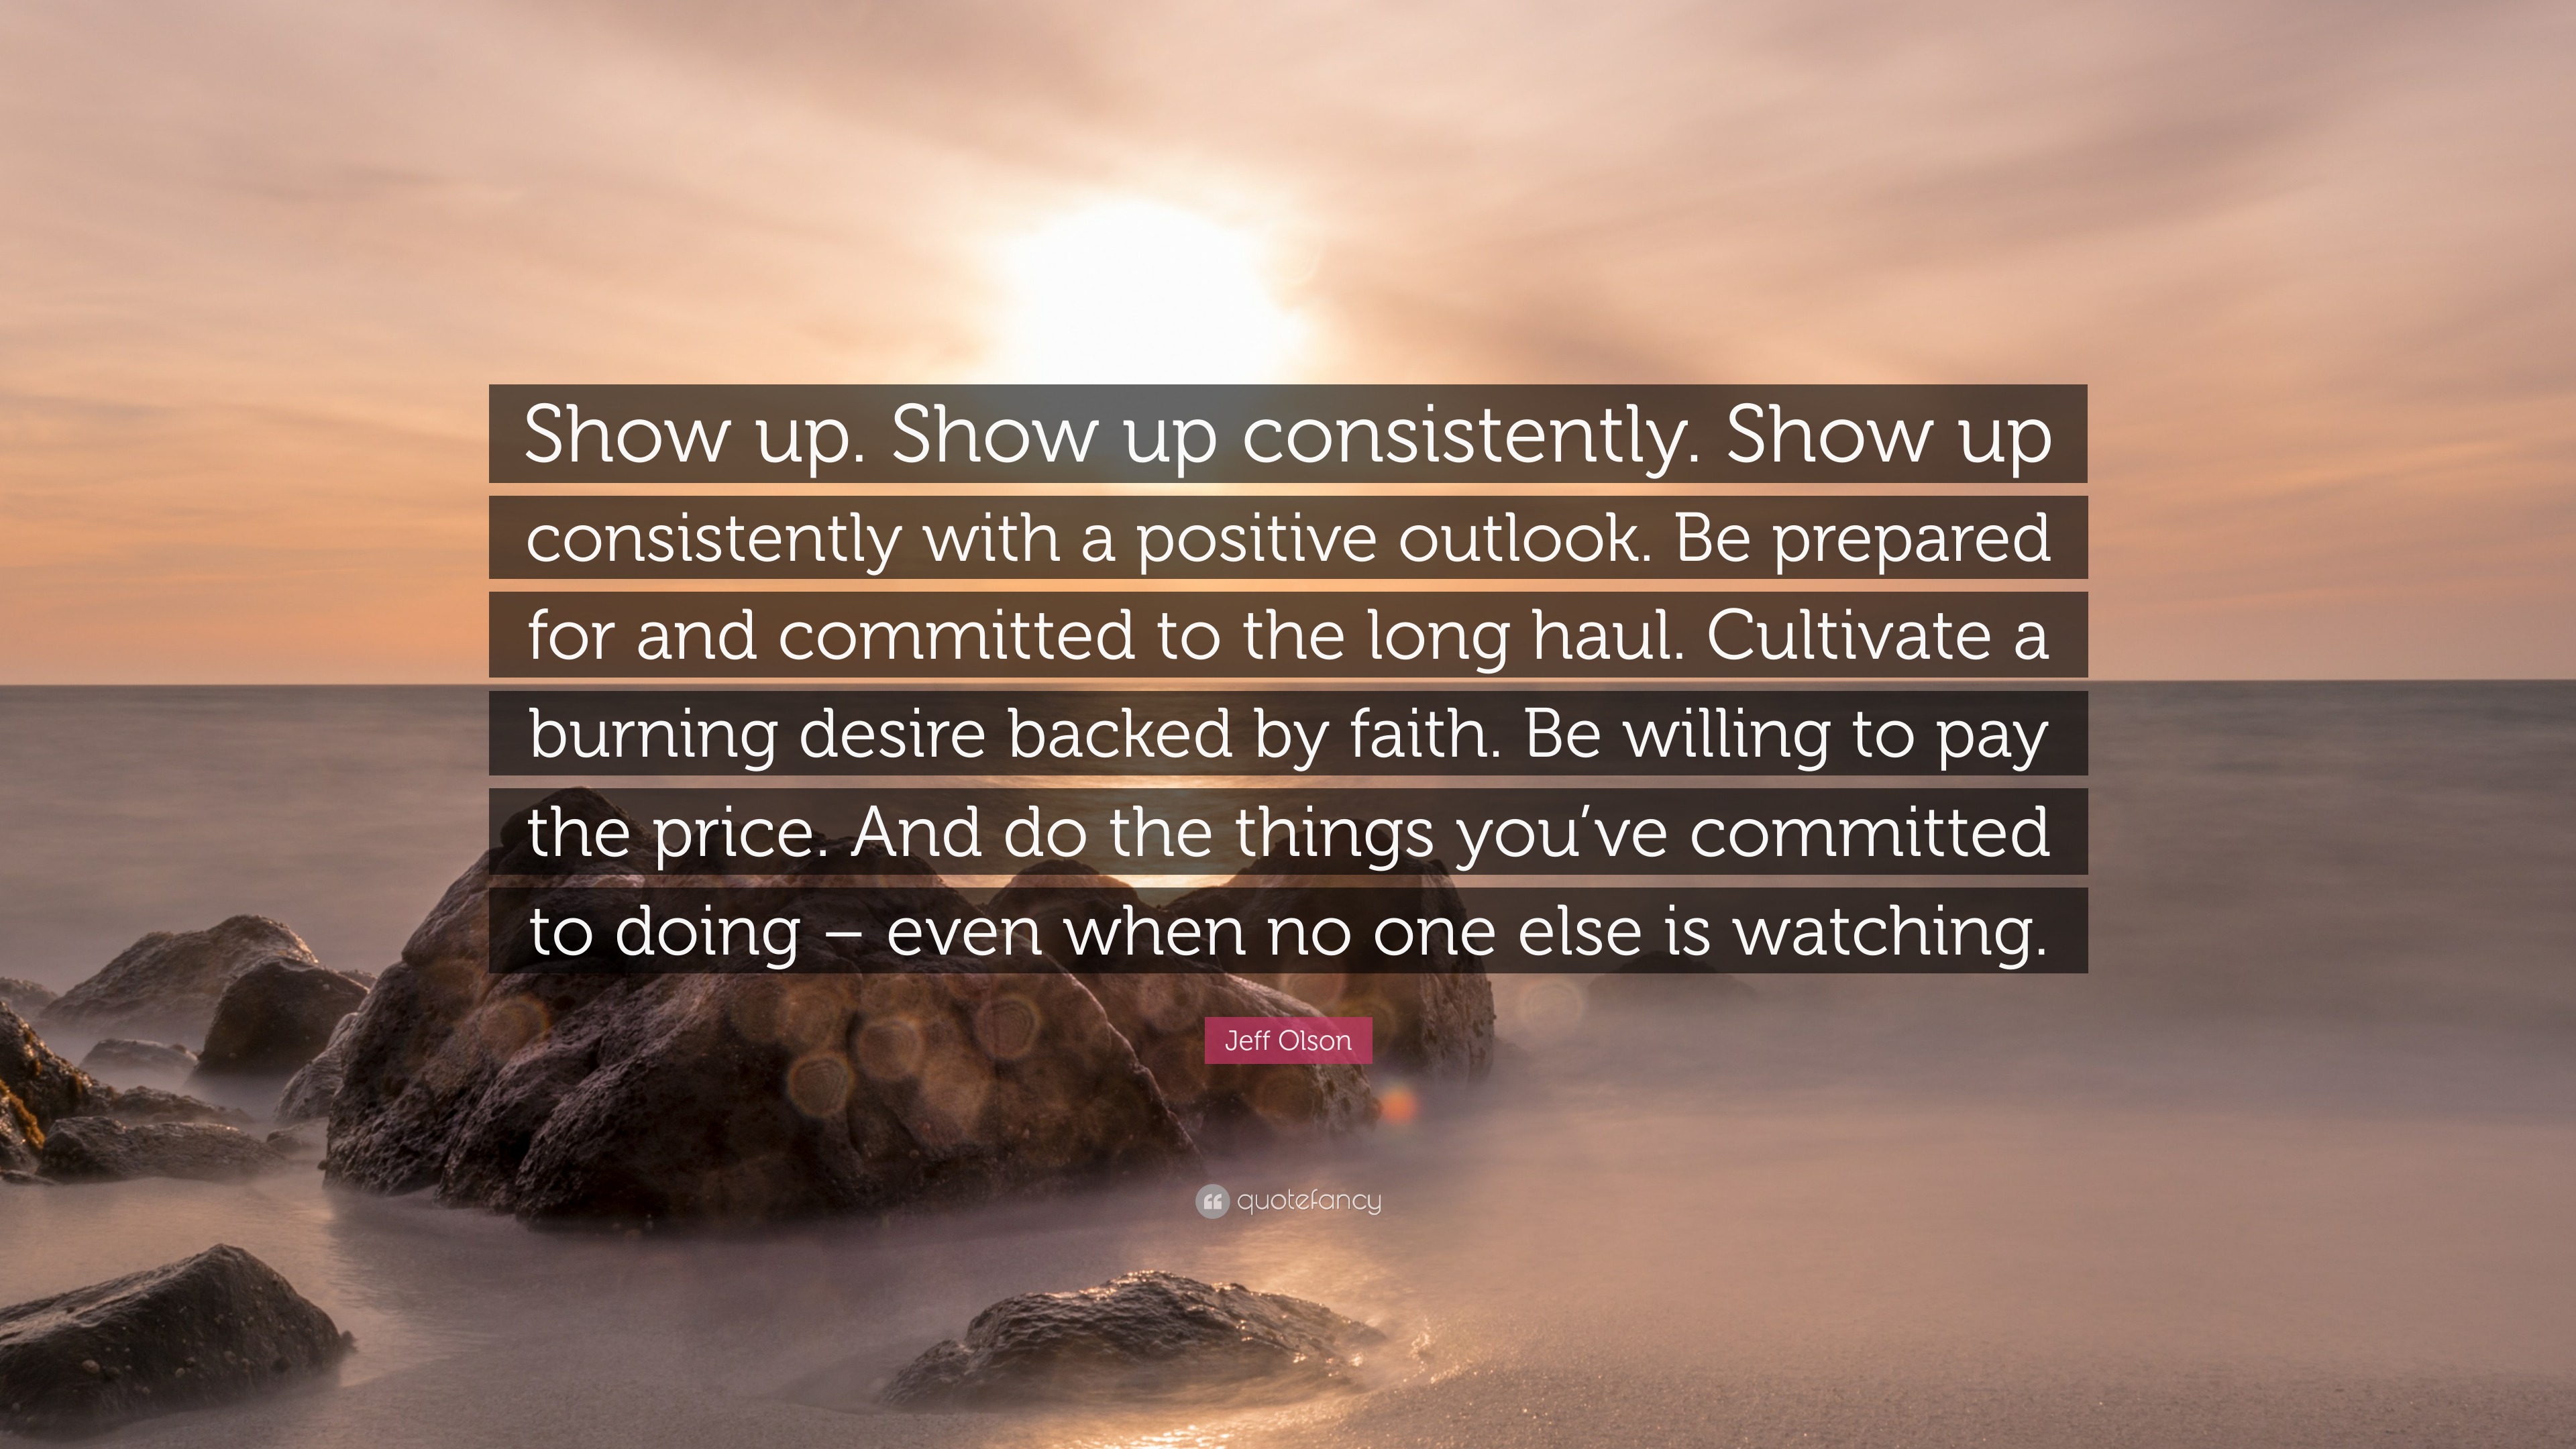 Jeff Olson Quote: “Show up. Show up consistently. Show up consistently